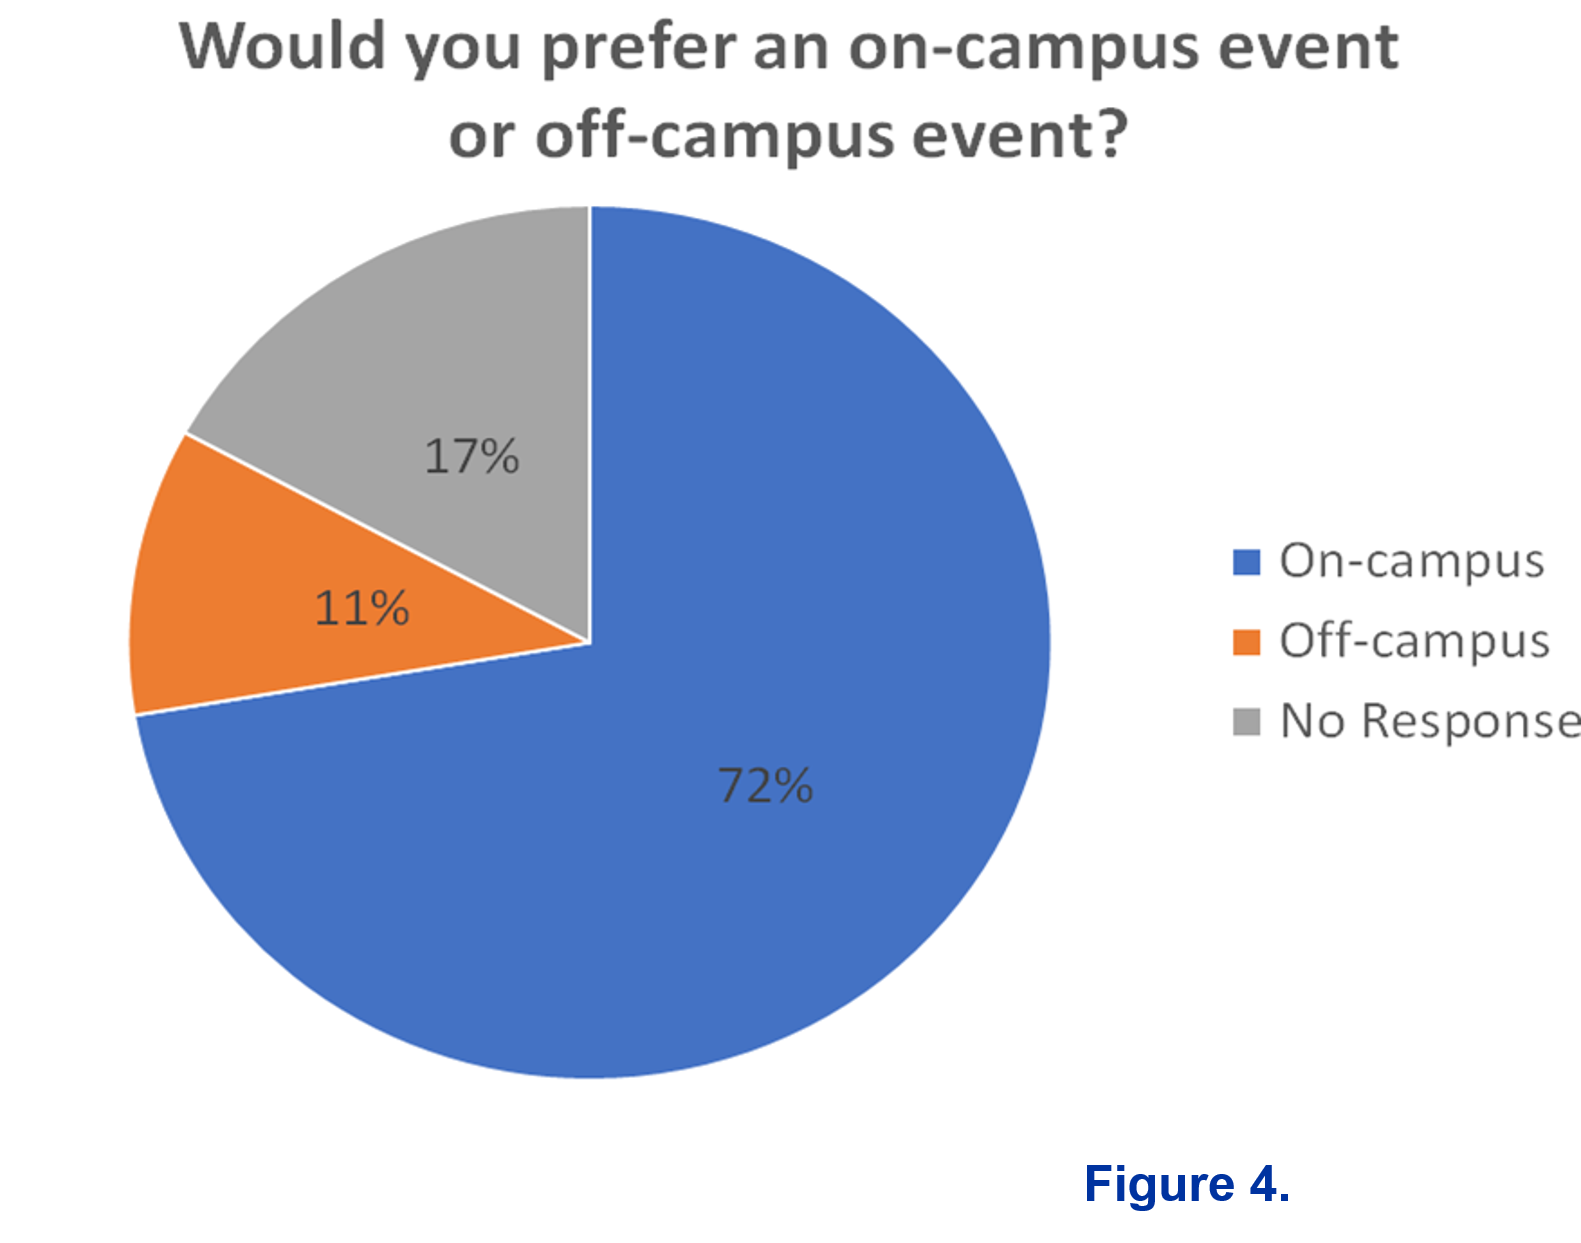 Pie chart - 72% on campus, 17% no response, 11% off campus